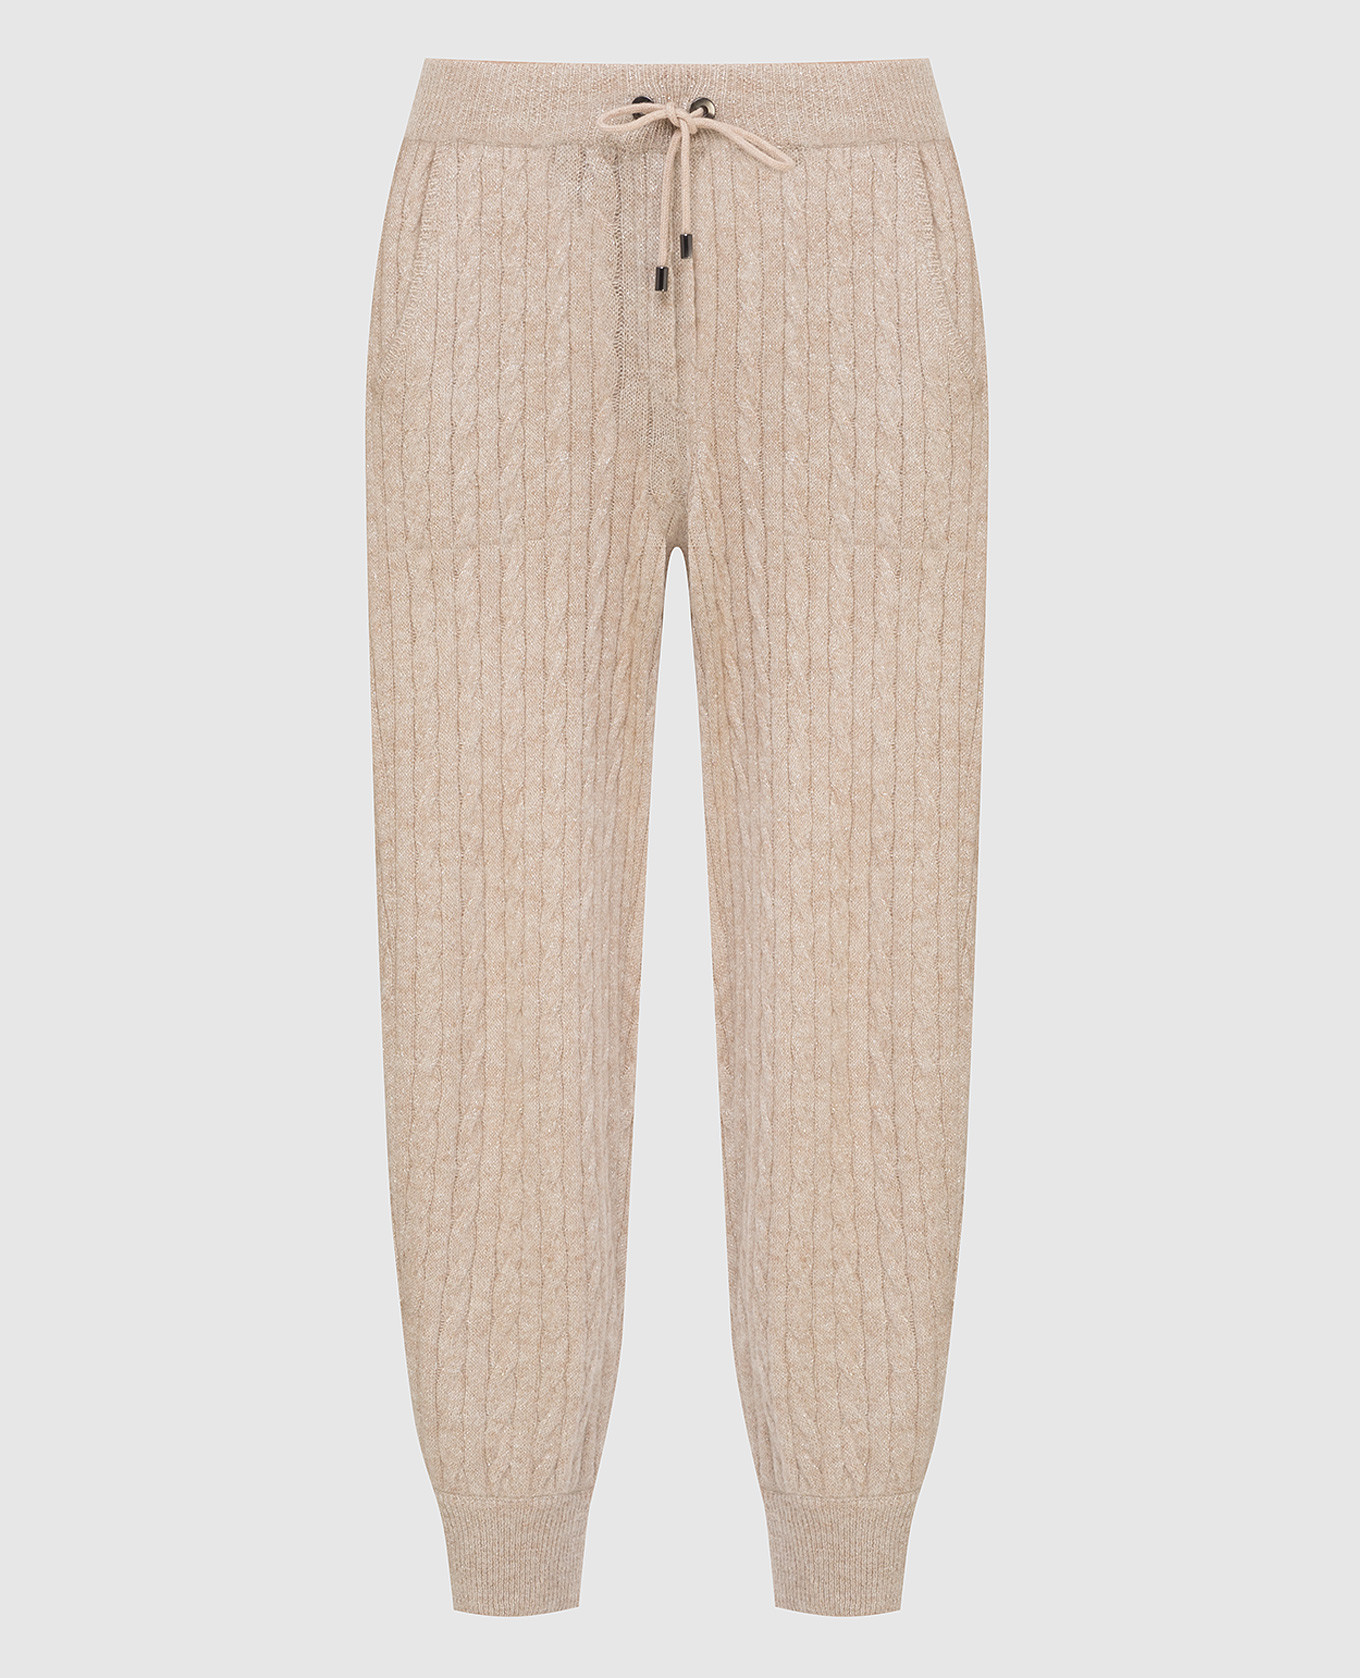 Light beige trousers with lurex and textured pattern